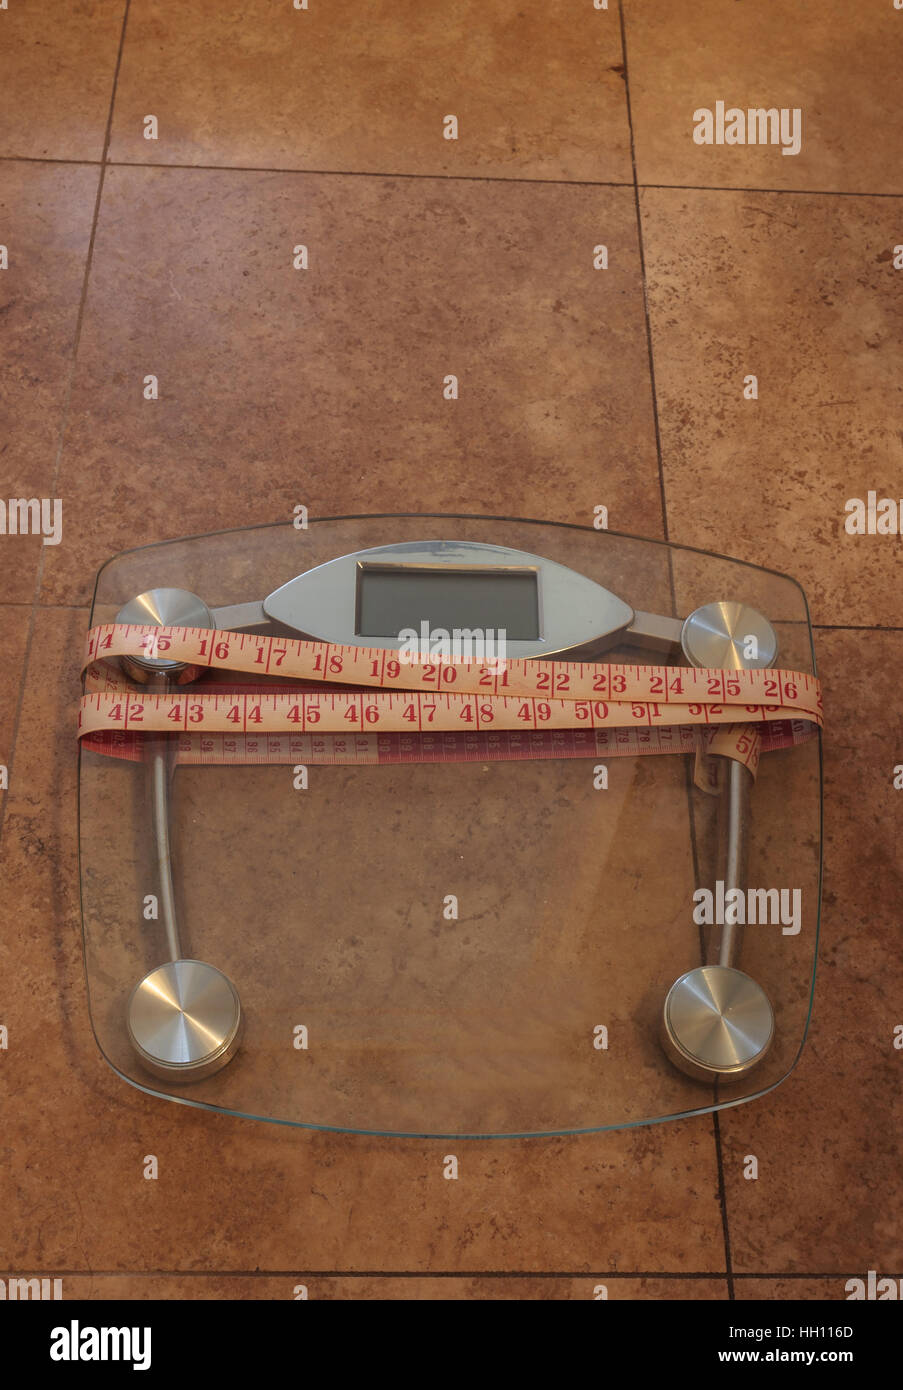 Scale to monitor weight with a measuring tape to take measurements to keep track of physical fitness Stock Photo